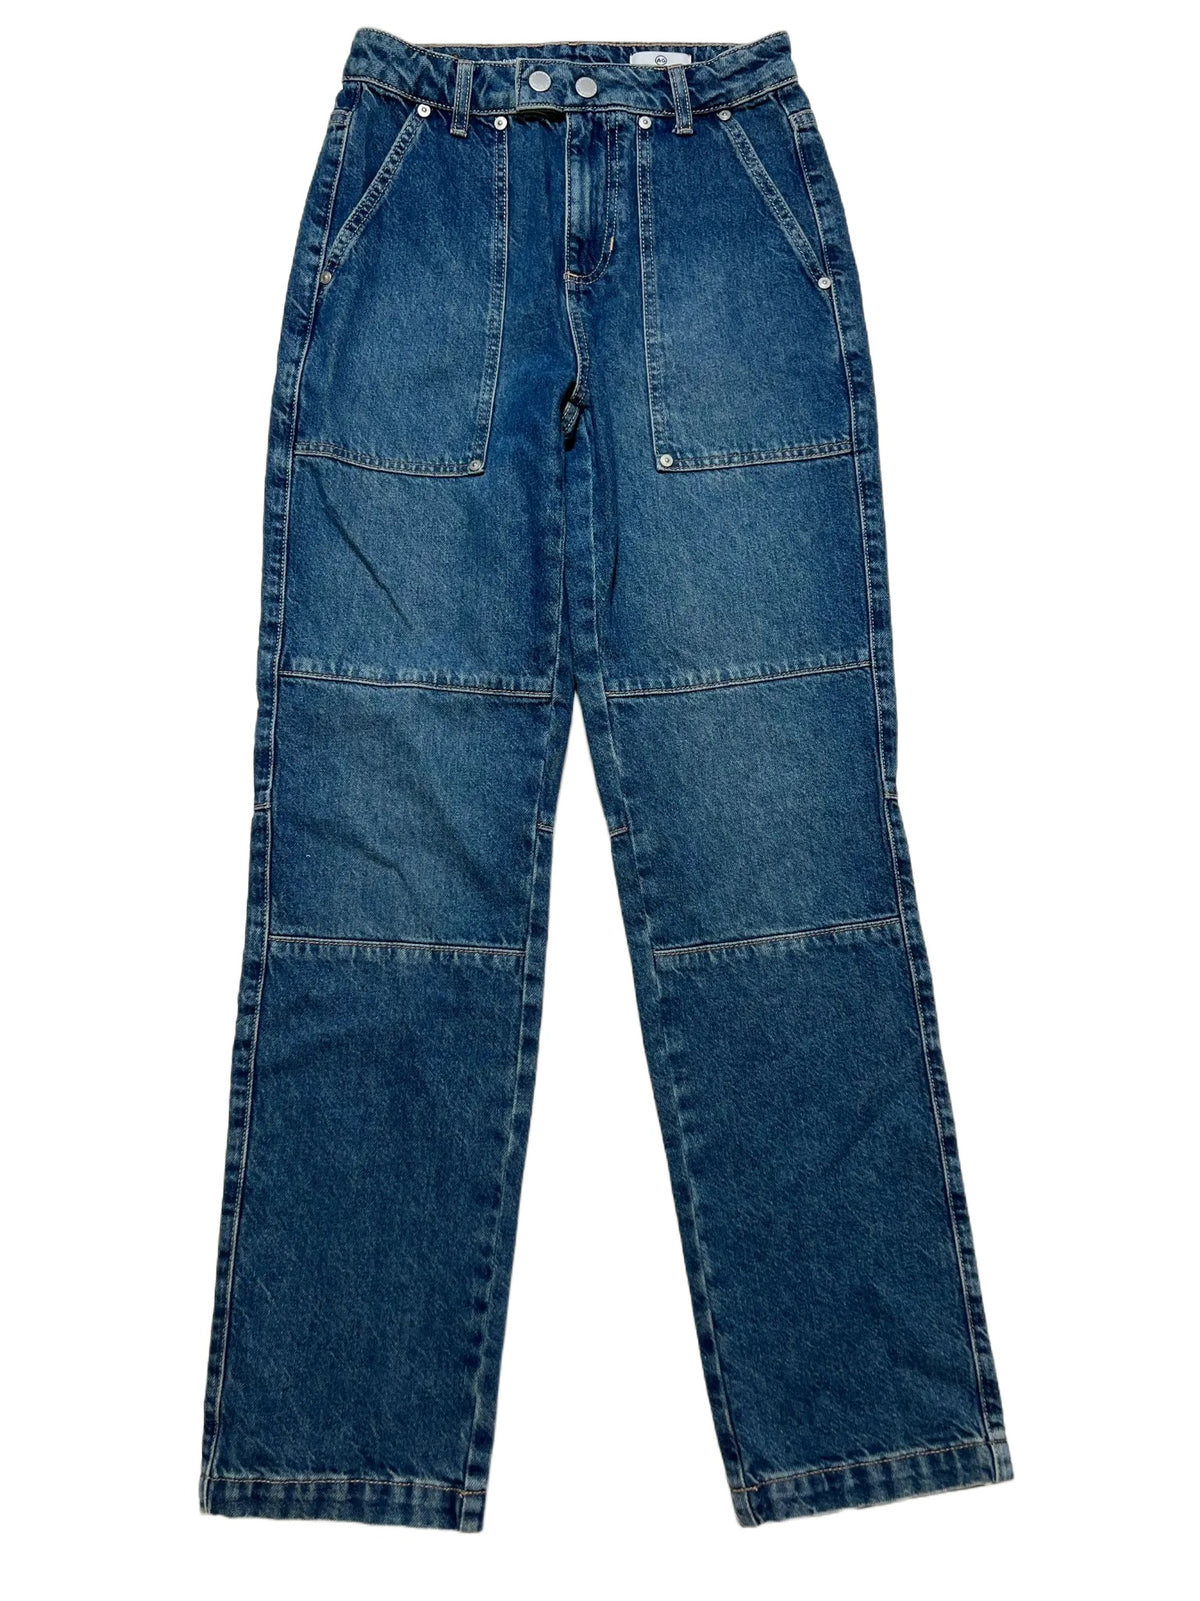 Adriano Goldschmied- "Relaxed Vintage Straight" Jeans